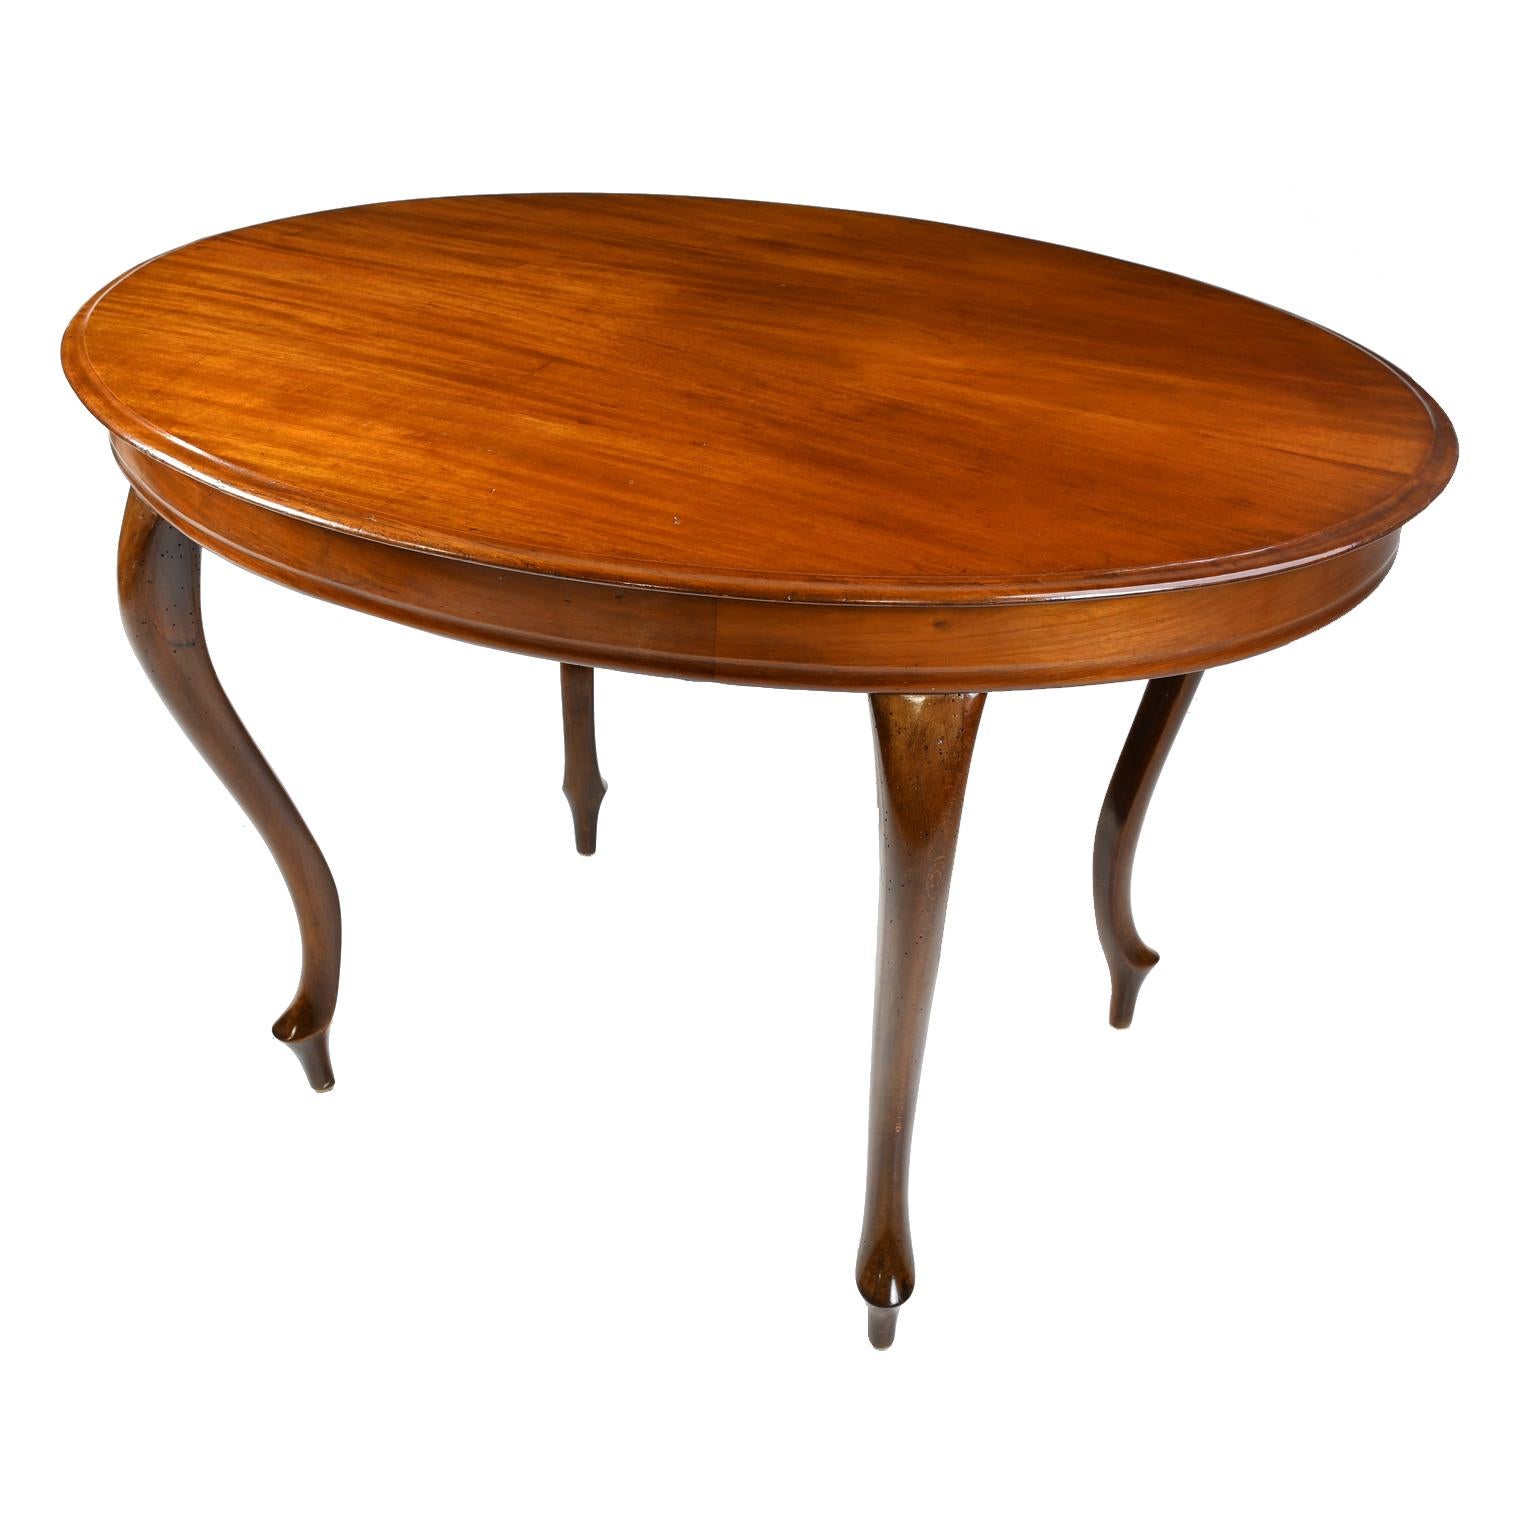 A fine Louis Philippe style salon table with oval top and scalloped apron resting on four graceful, carved cabriole legs. Top is made of beautiful bookmatched, solid mahogany. The apron is banded with a thick face cut mahogany. Legs are made of